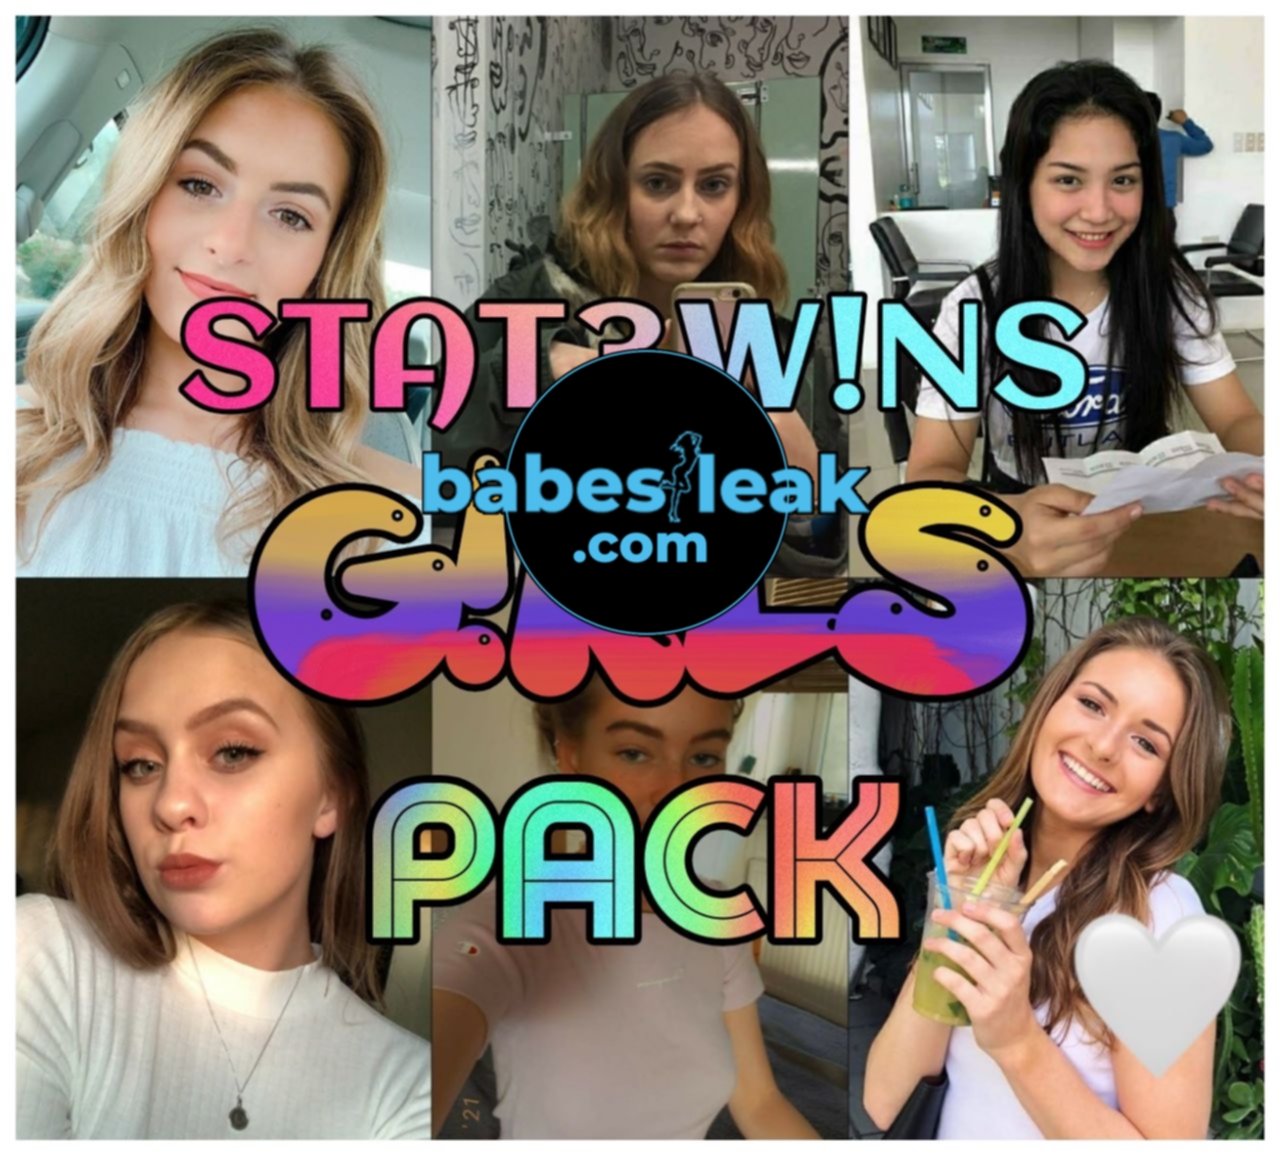 Statewins Girls Pack Stw028 Onlyfans Leaks Snapchat Leaks Statewins Leaks Teens Leaks And 3922